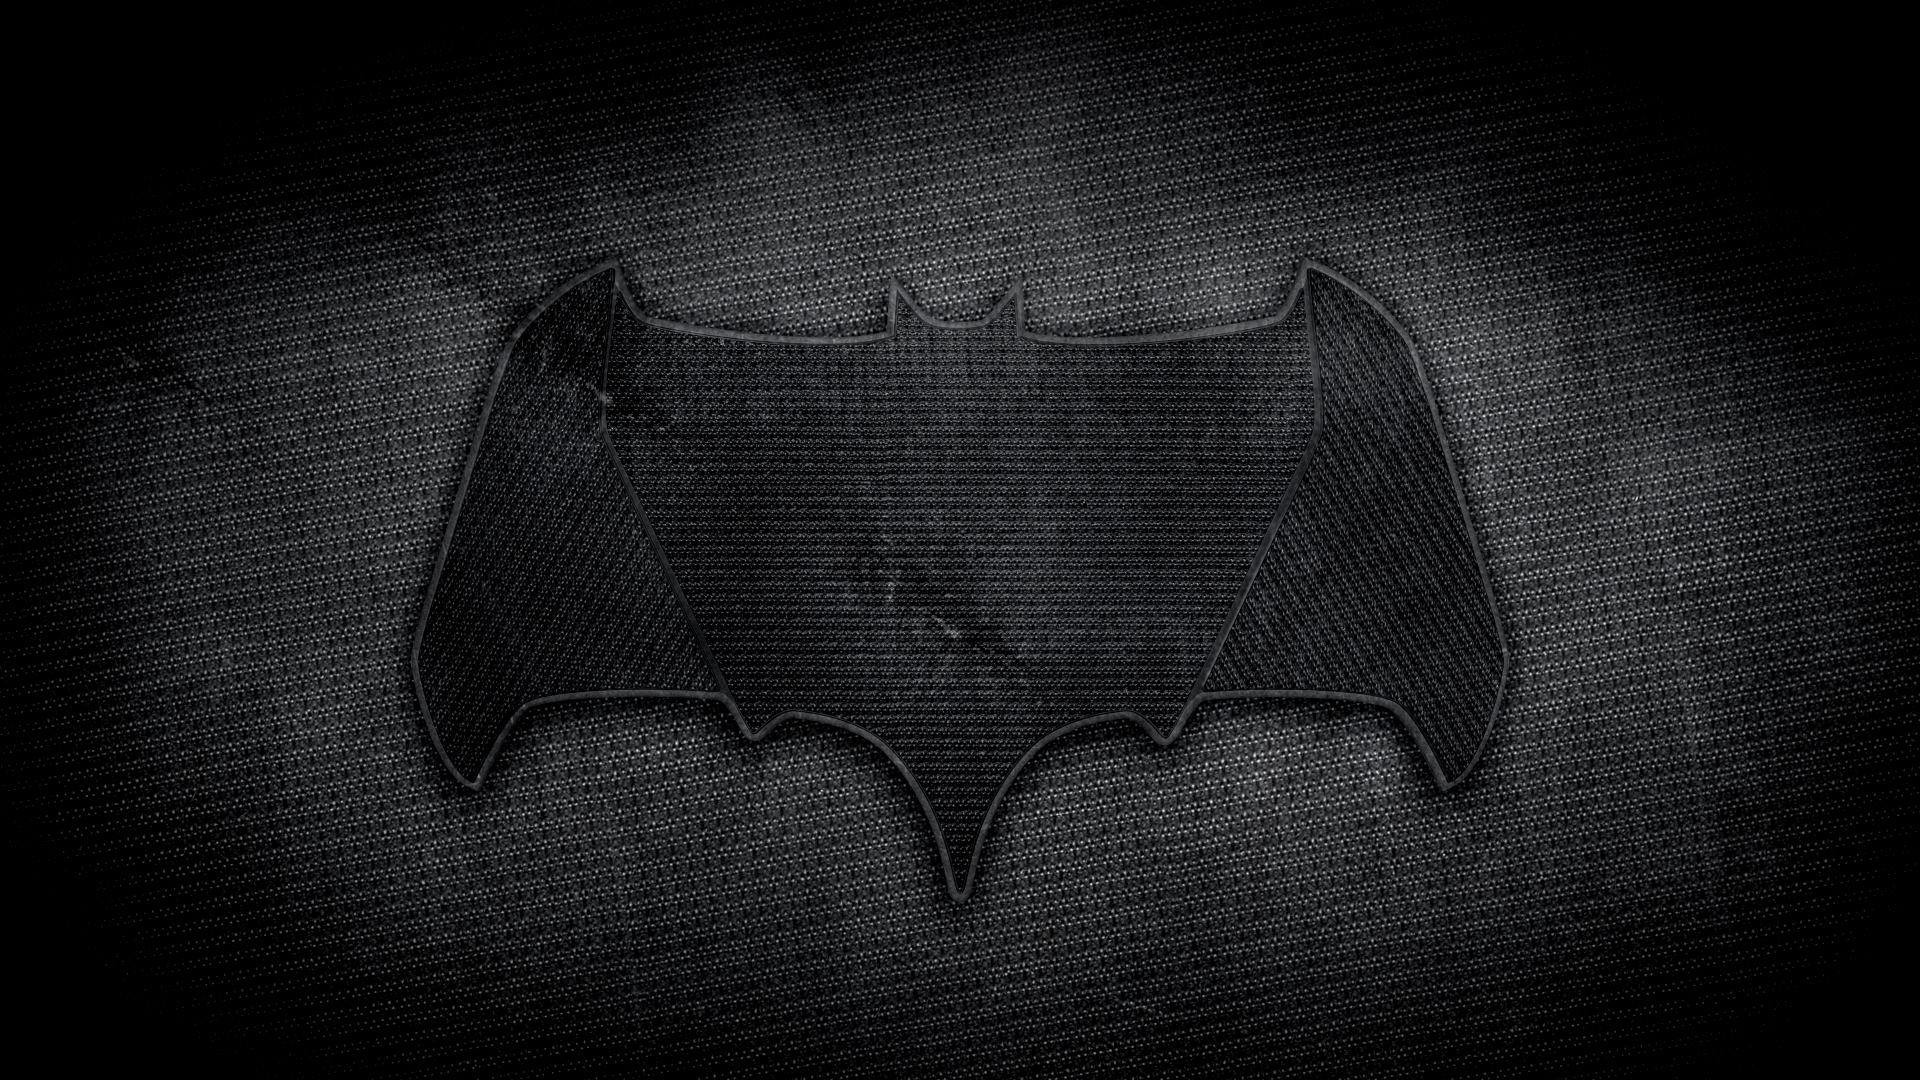 1920x1080 Found a nice wallpaper of the new Bat design, thought you guys might like  it!